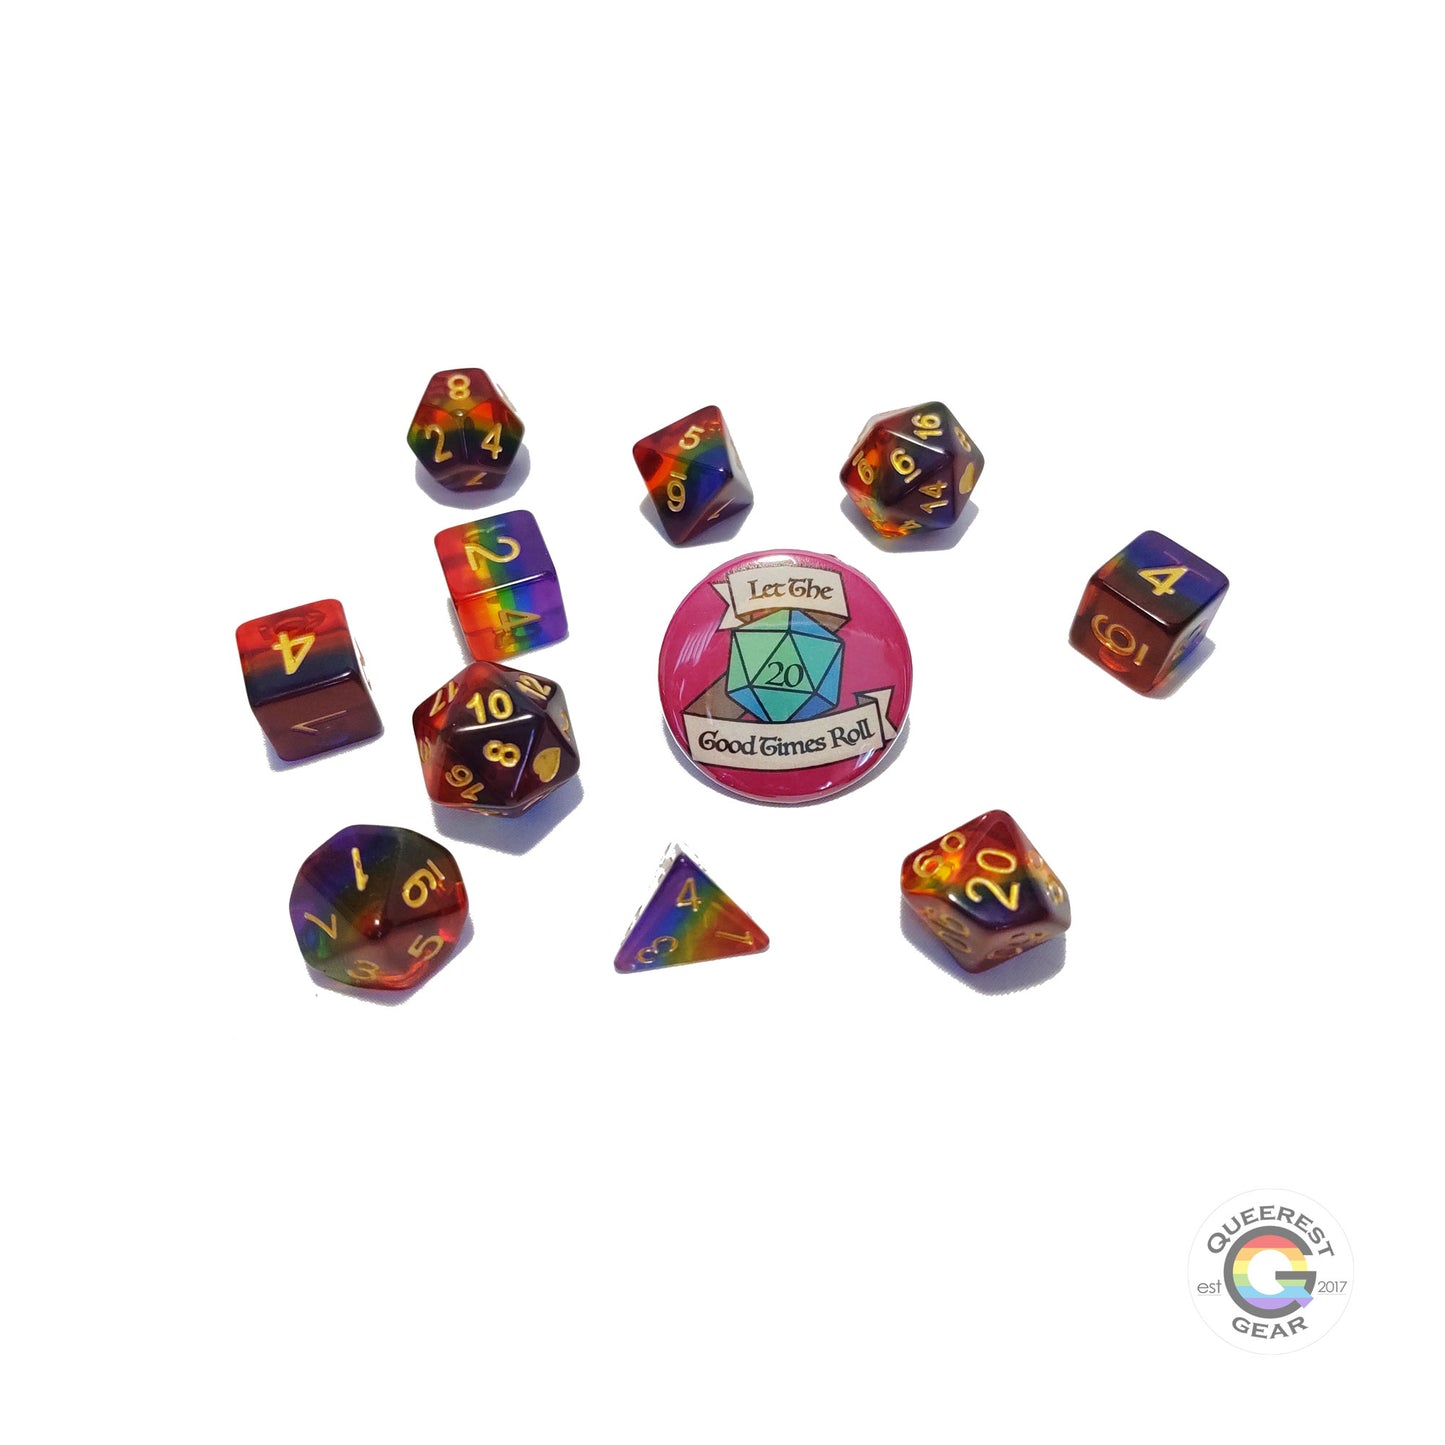 11 piece set of polyhedral dice scattered on a white background. They are transparent and colored in the stripes of the rainbow flag with gold ink. There is the freebie “let the good times roll” pinback button among them. 